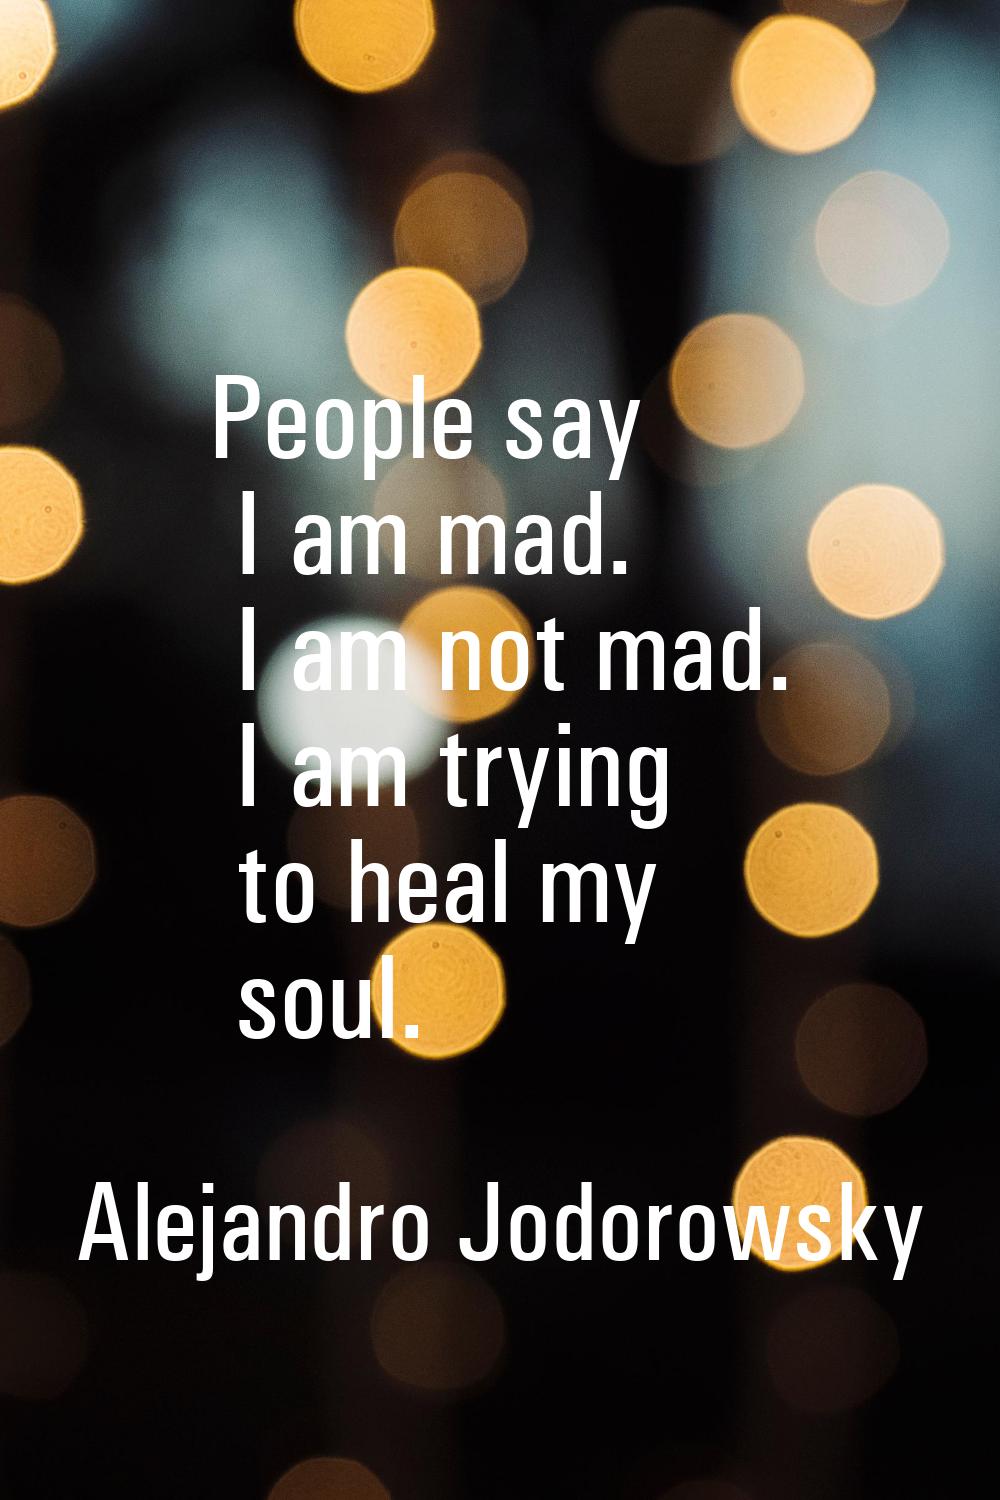 People say I am mad. I am not mad. I am trying to heal my soul.